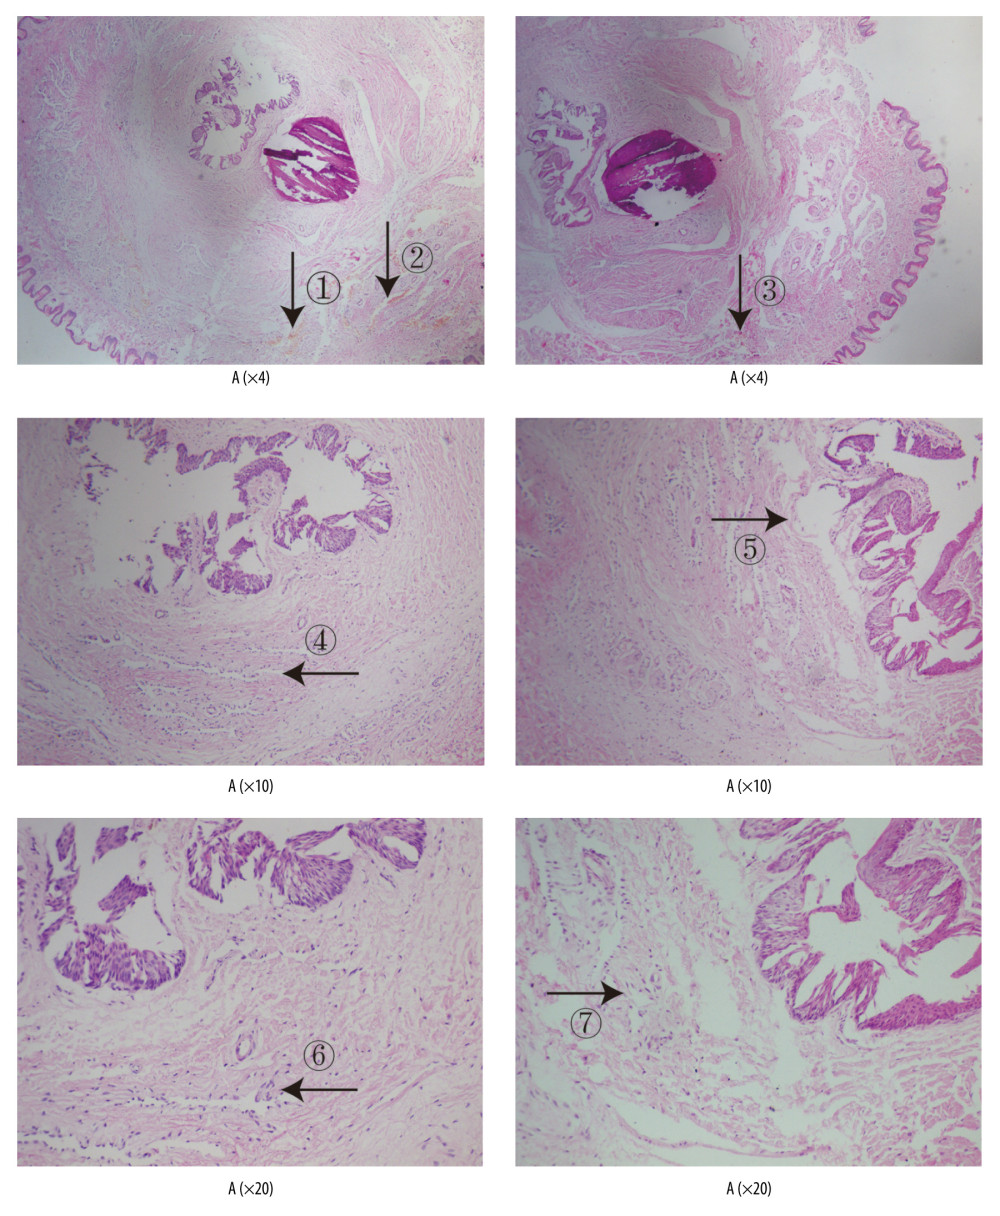 Analyses of penis tissue in rats using hematoxylin and eosin (HE) staining. The penis tissue of rats was stained with HE to observe pathologic changes in the penis under electron microscopy (n=6 animals per group). In group A: (i) the blood sinuses are abundant and neatly arranged (arrows ➀ ➁); (ii) tissue gap is small (arrows ➃); (iii) nucleus is abundant (arrows ➅). In group B: (i) the blood sinuses are significantly reduced (arrows ➂); (ii) smooth muscle fibers are disorderly arranged and tissue gaps increase (arrows ➄); (iii) the nucleus is reduced (arrows ➆).